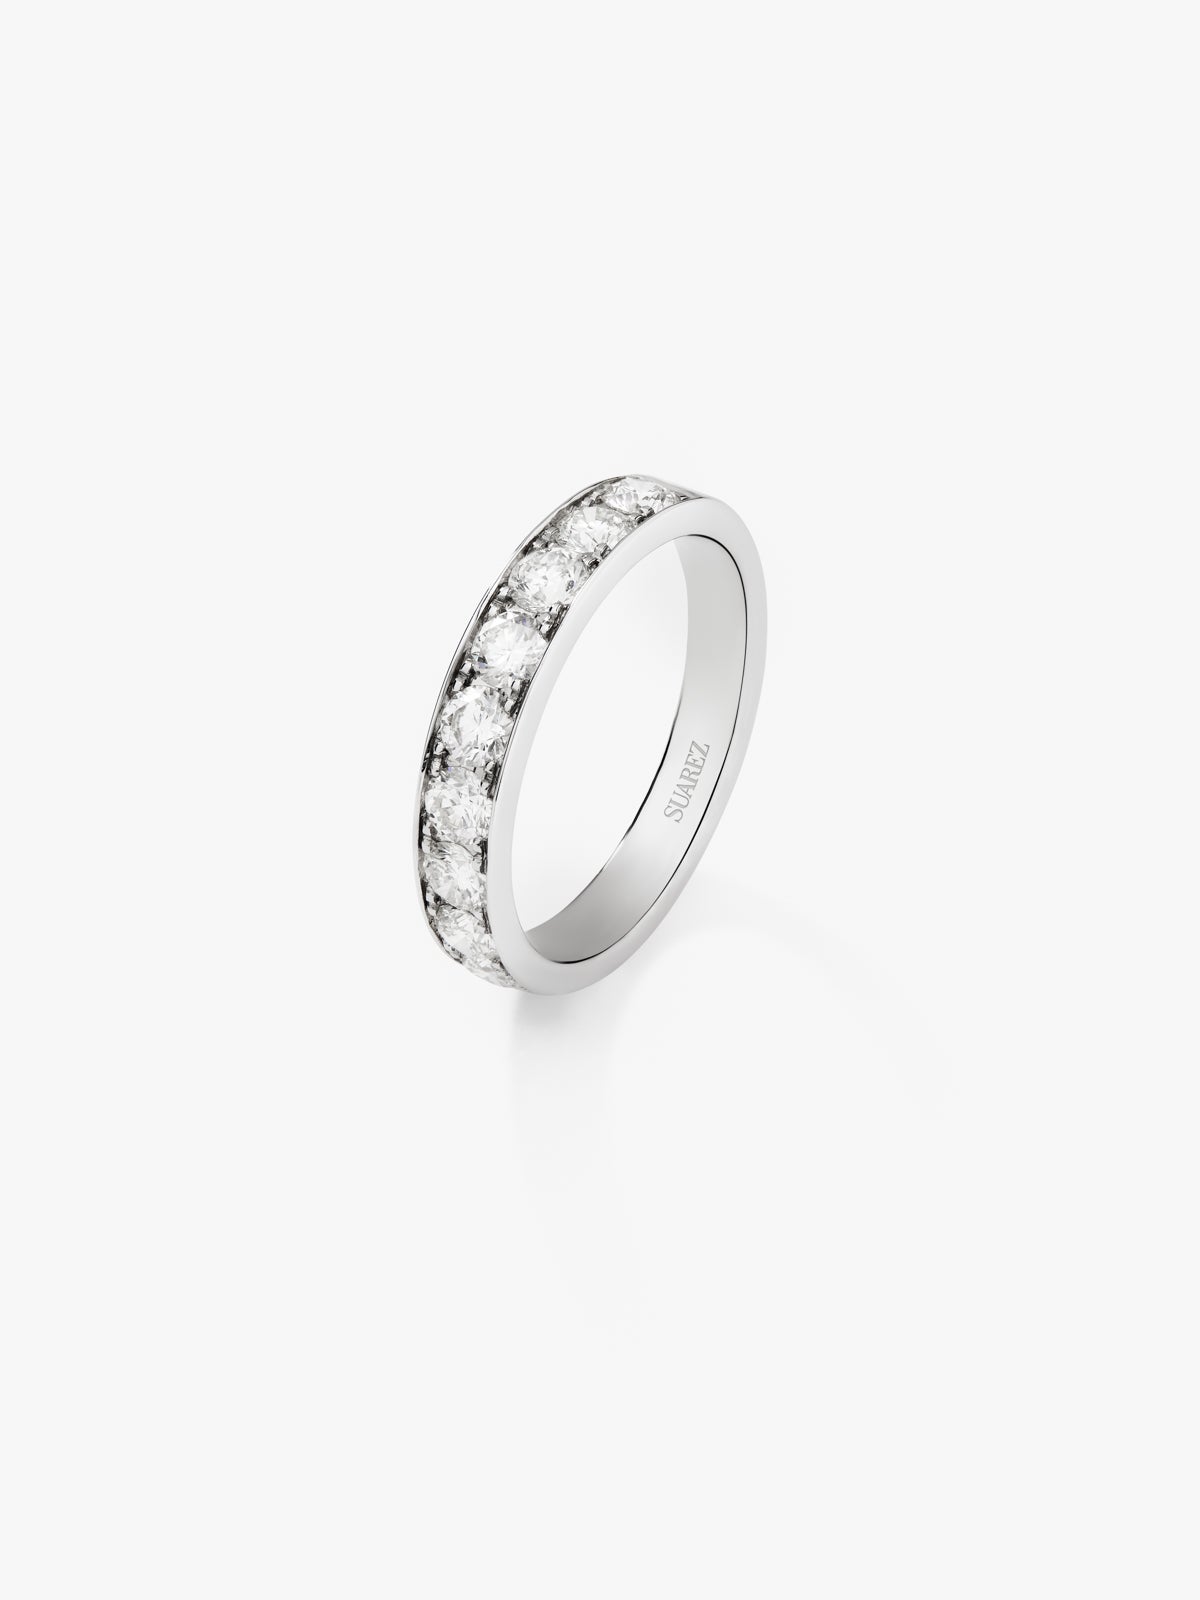 Half ring in 18K white gold with 8 brilliant-cut diamonds with a total of 1.14 cts